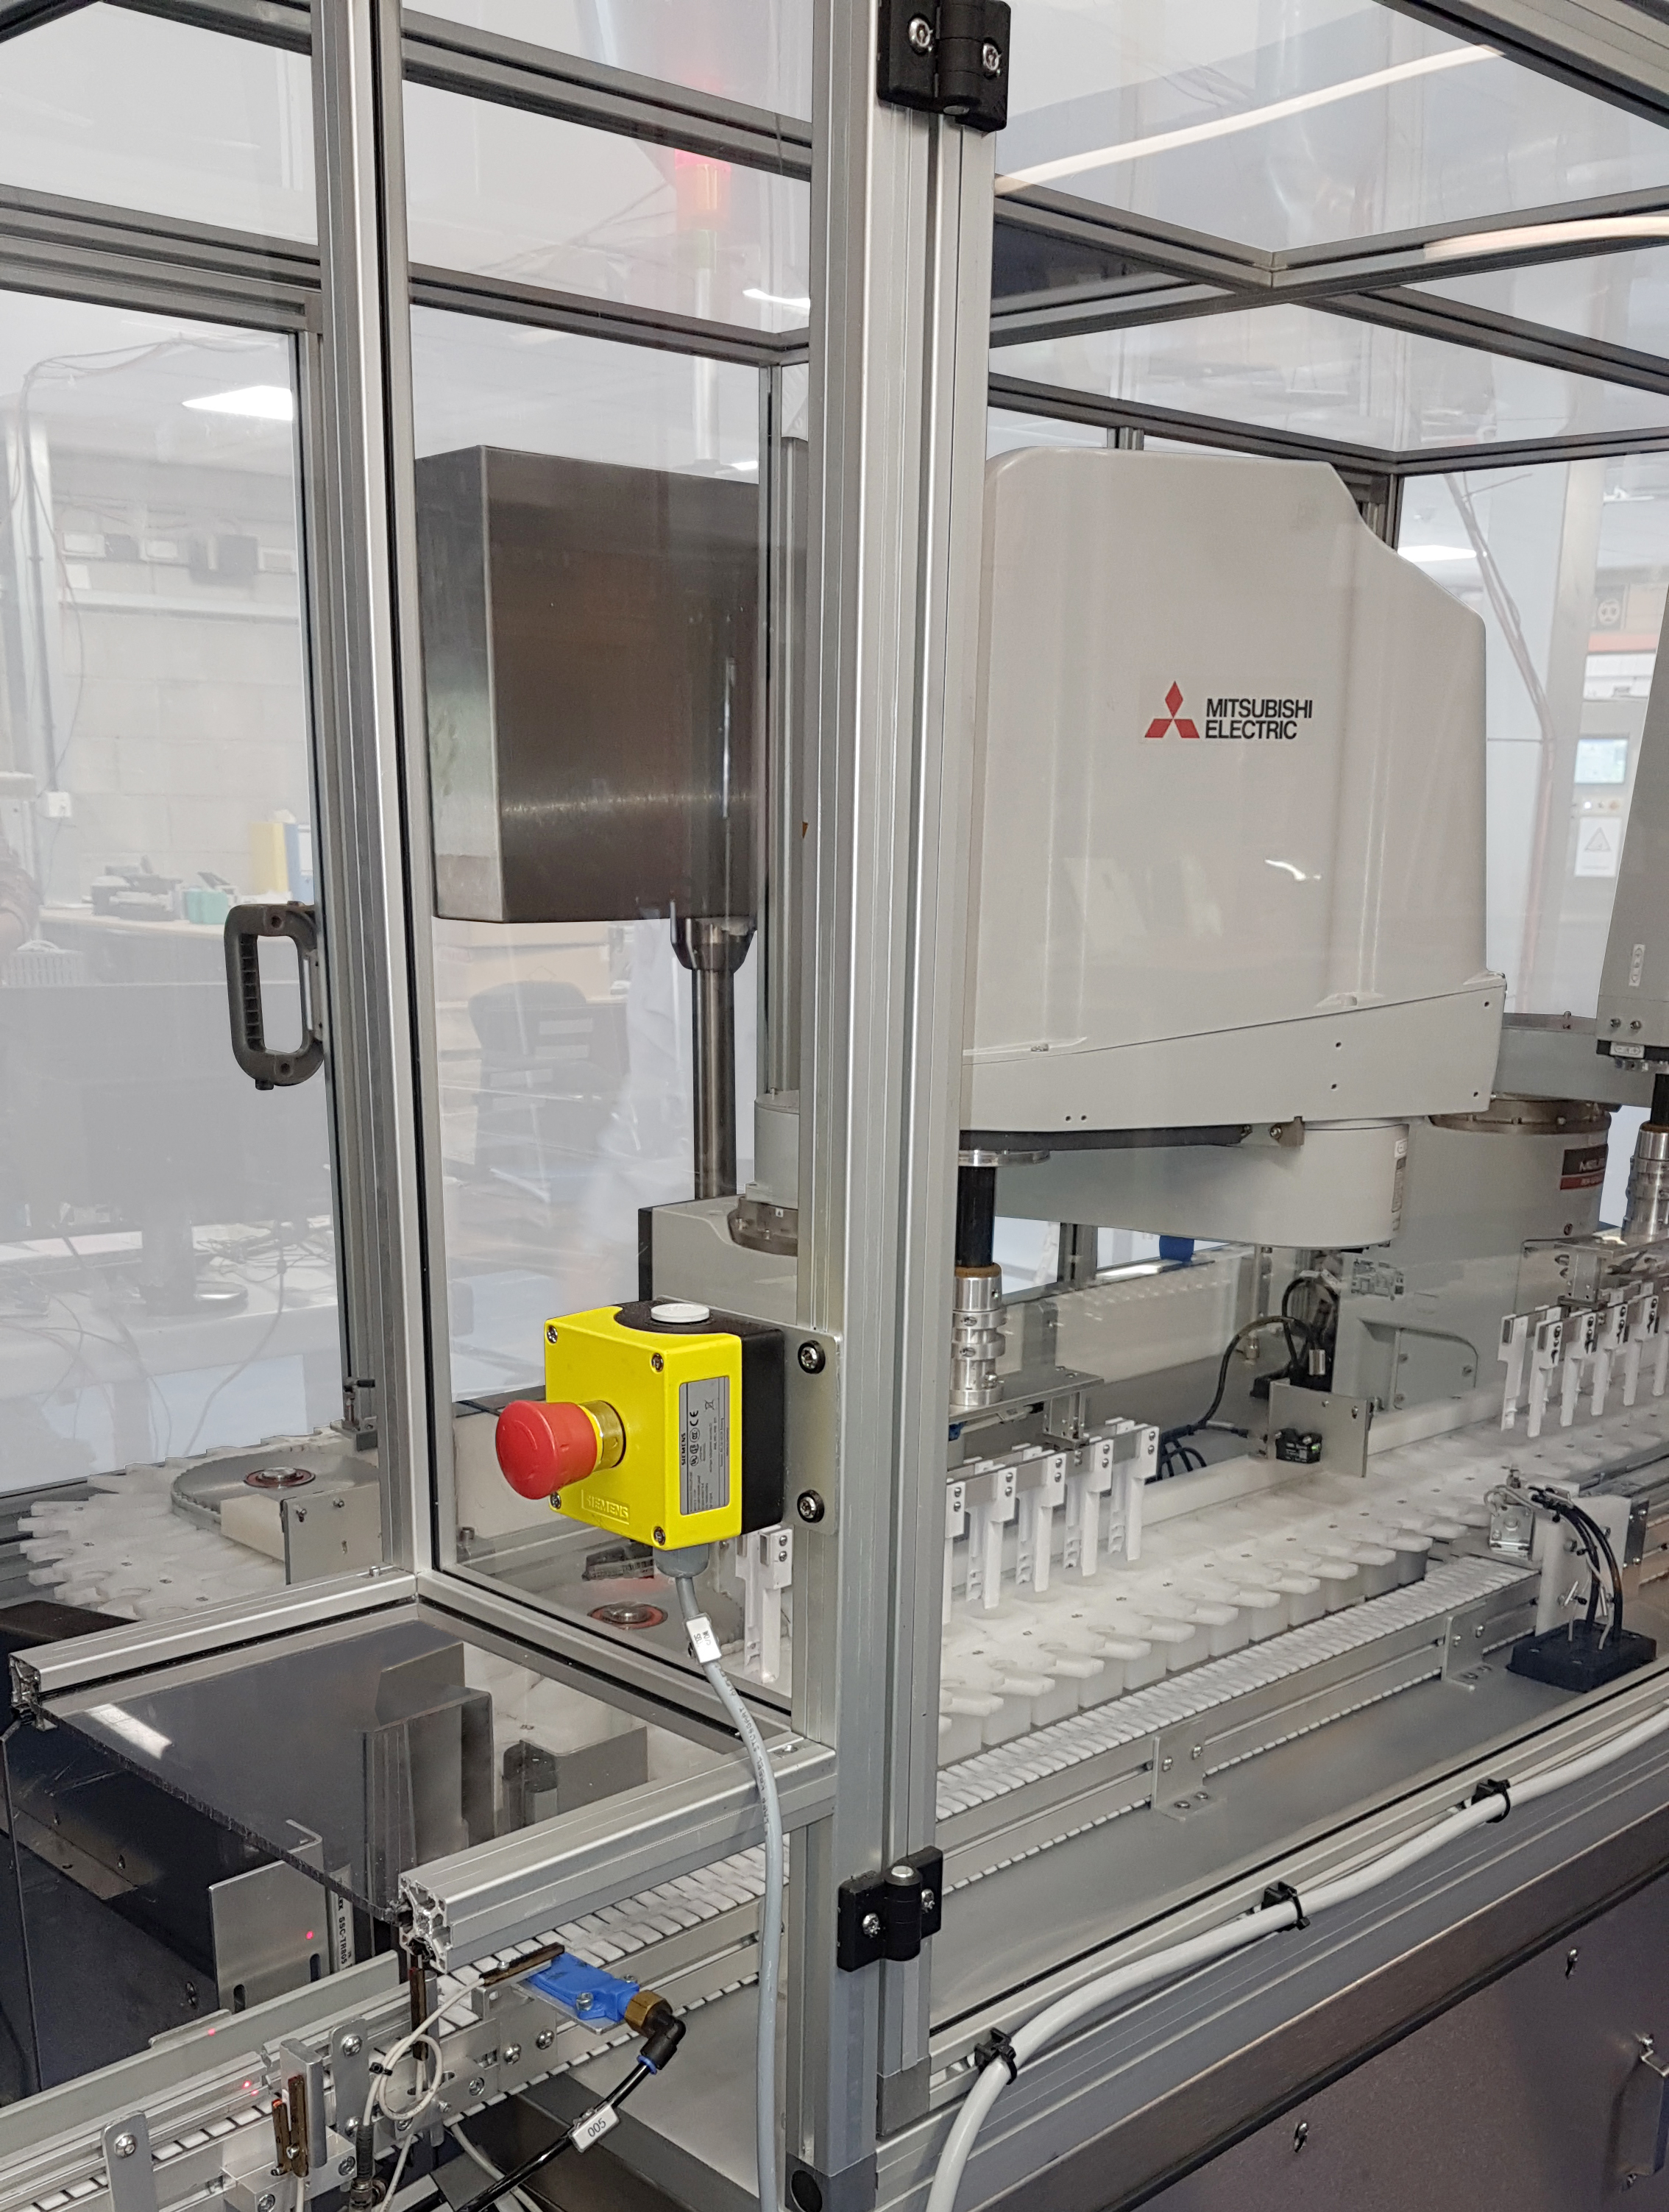 A leading pharmaceutical manufacturer specialising in asthma inhalers has transformed its in-line testing operations thanks to an automated quality control solution developed by Mitsubishi Electric and Optimal Industrial Automation.